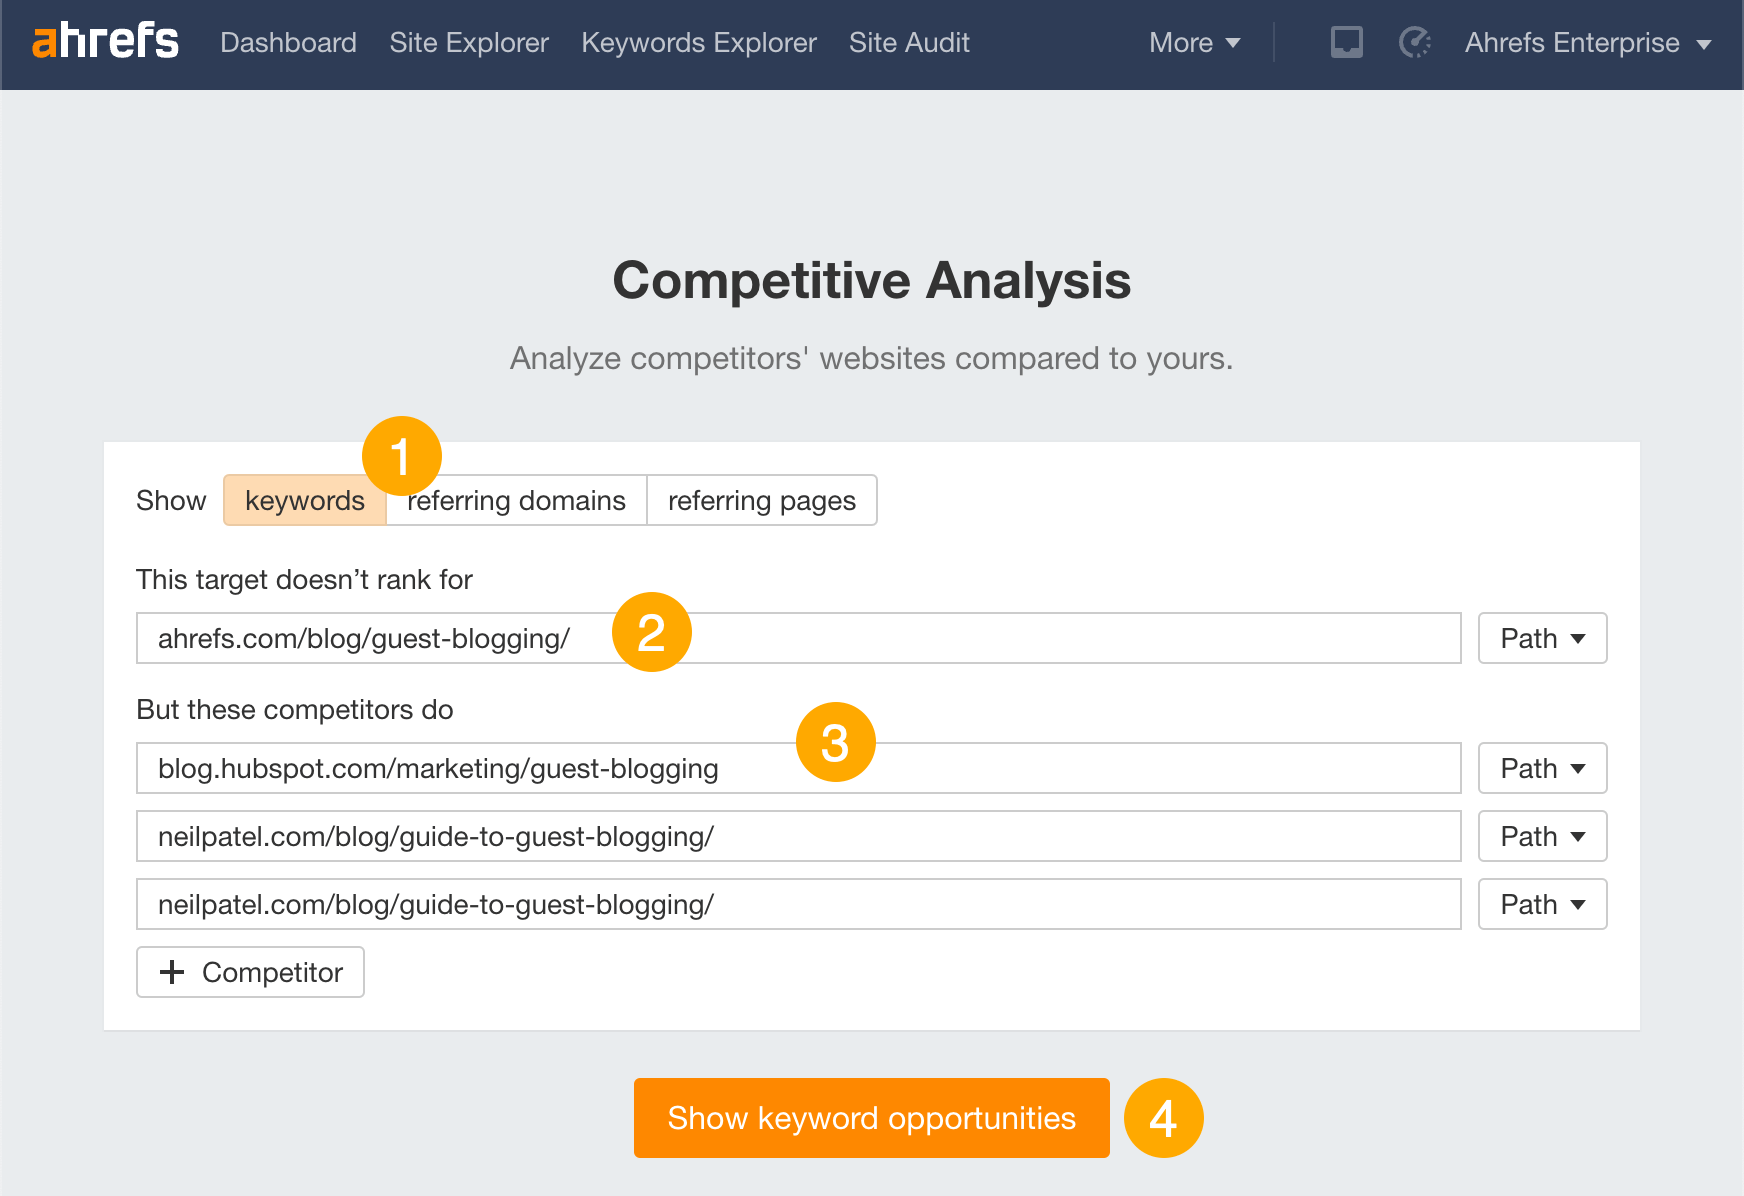 Finding missing subtopics in Ahrefs' Competitive Analysis tool